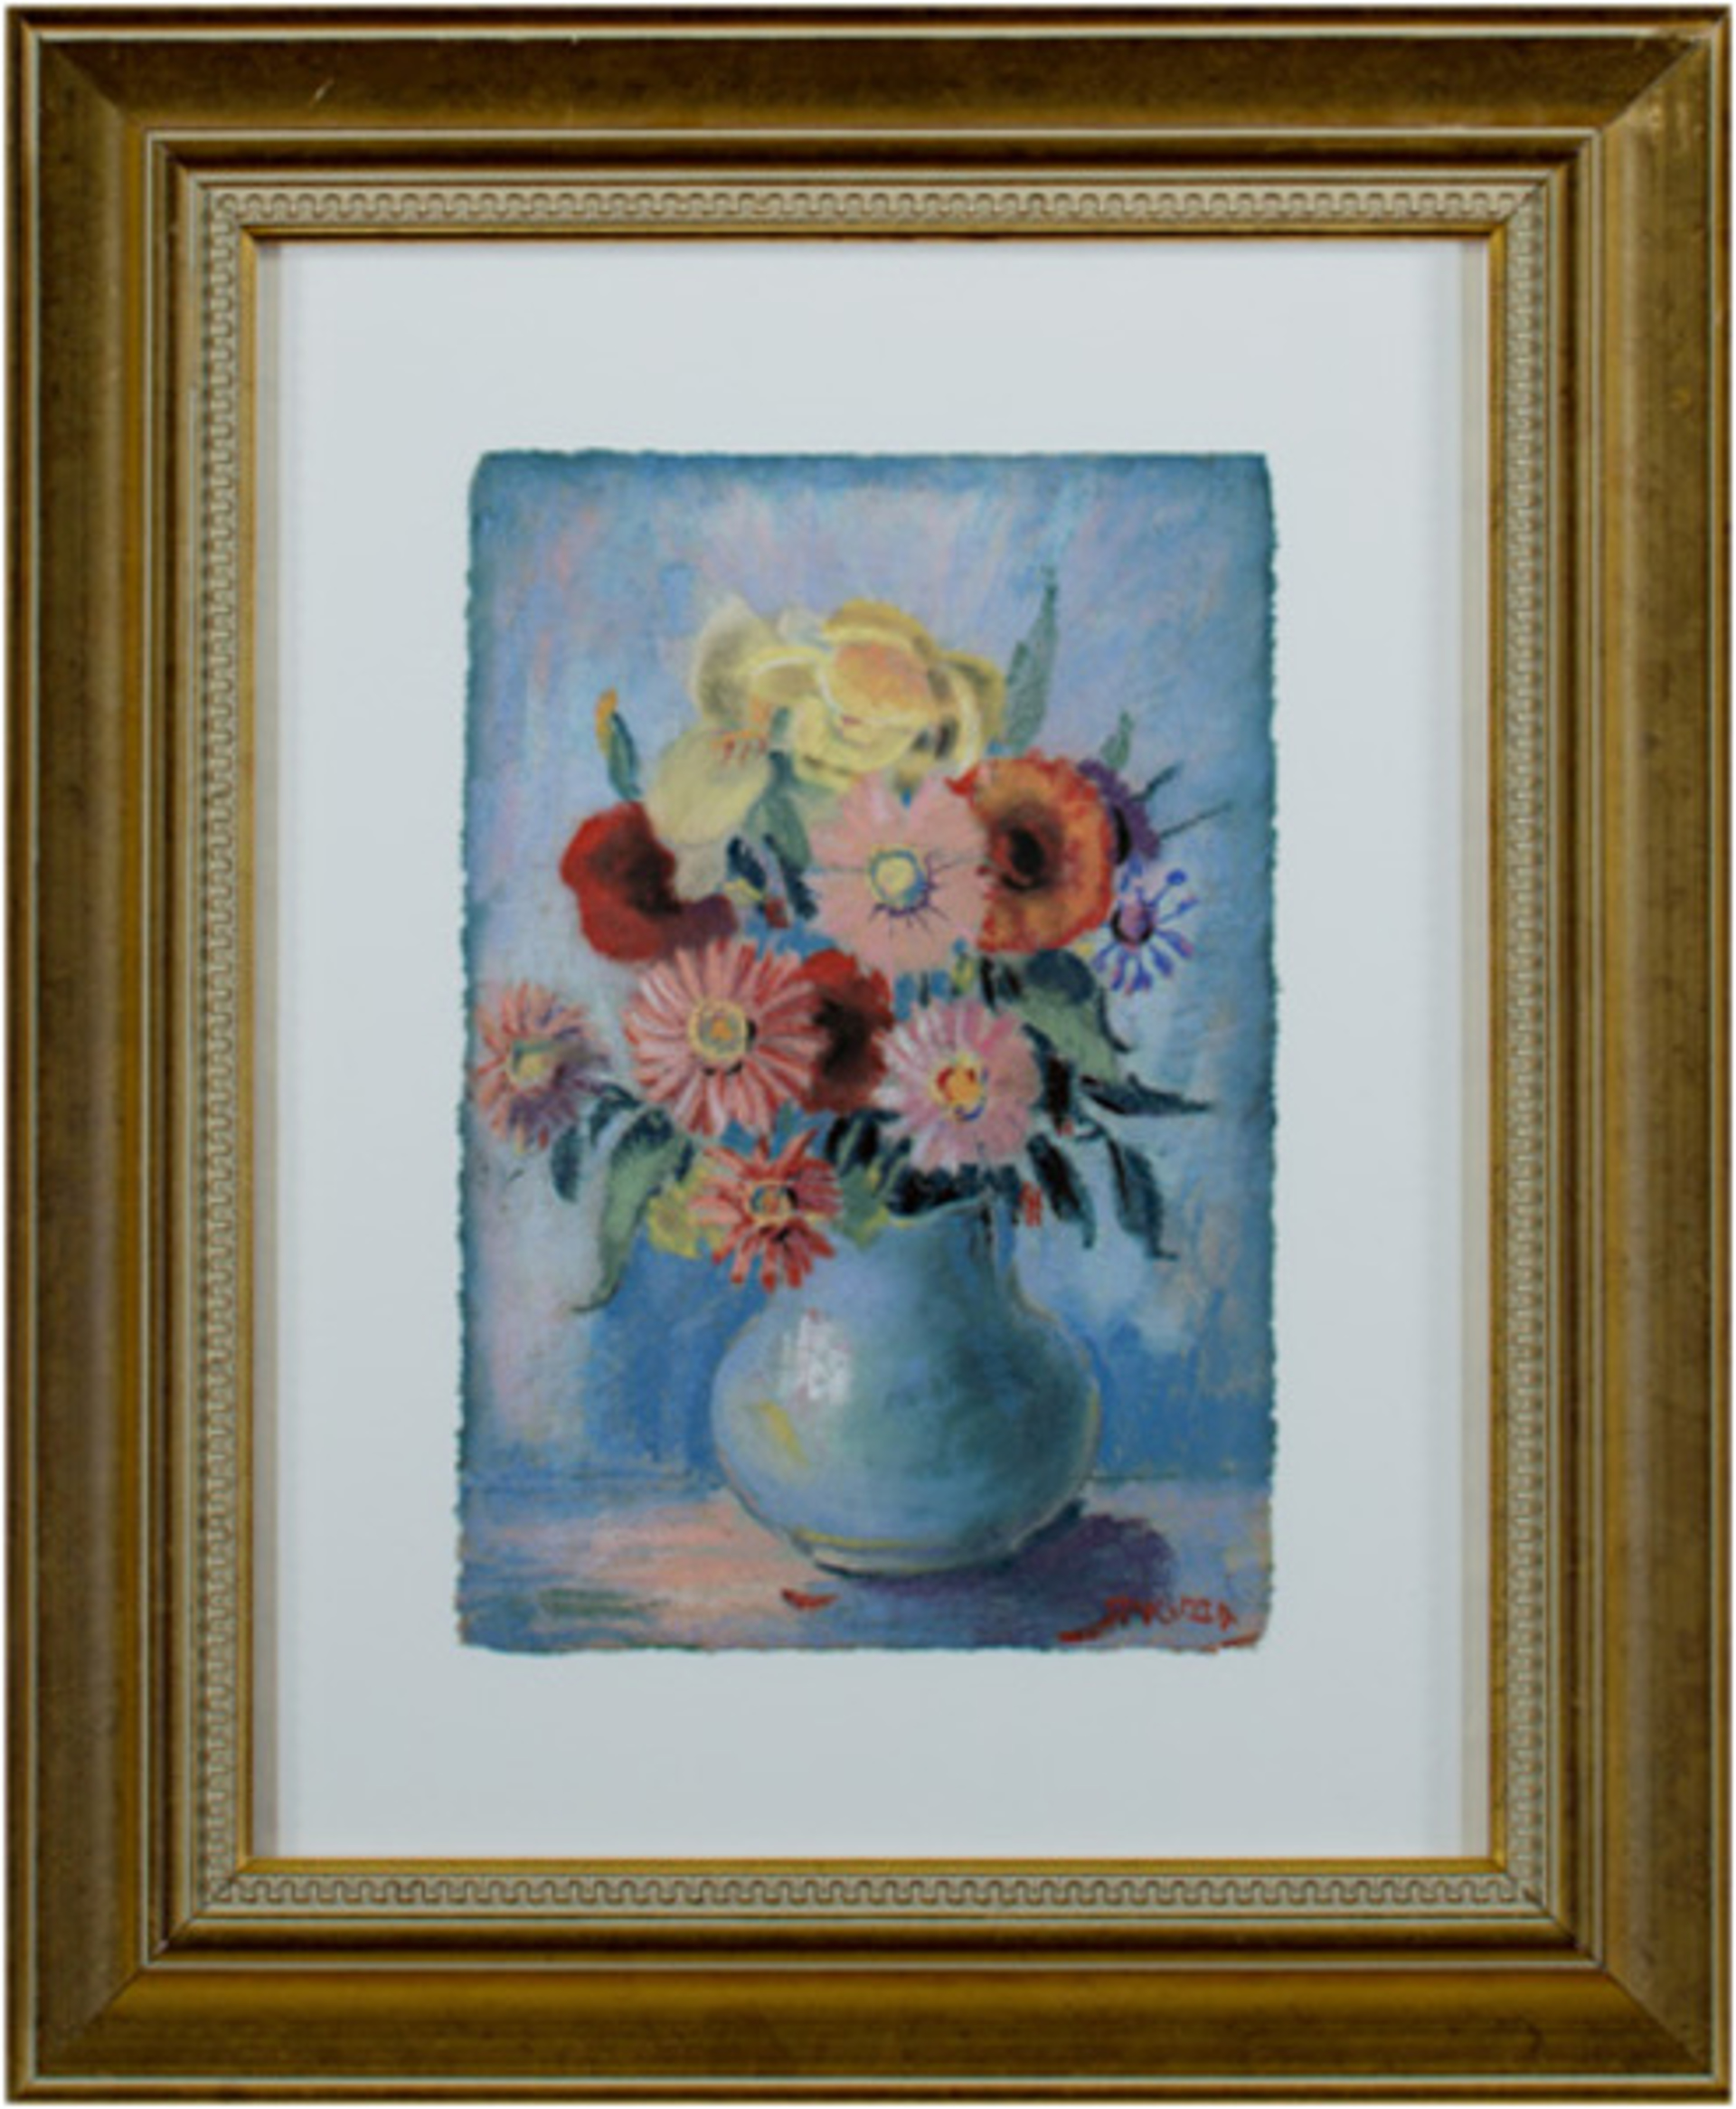 Flowers in Blue Vase by Francesco Spicuzza